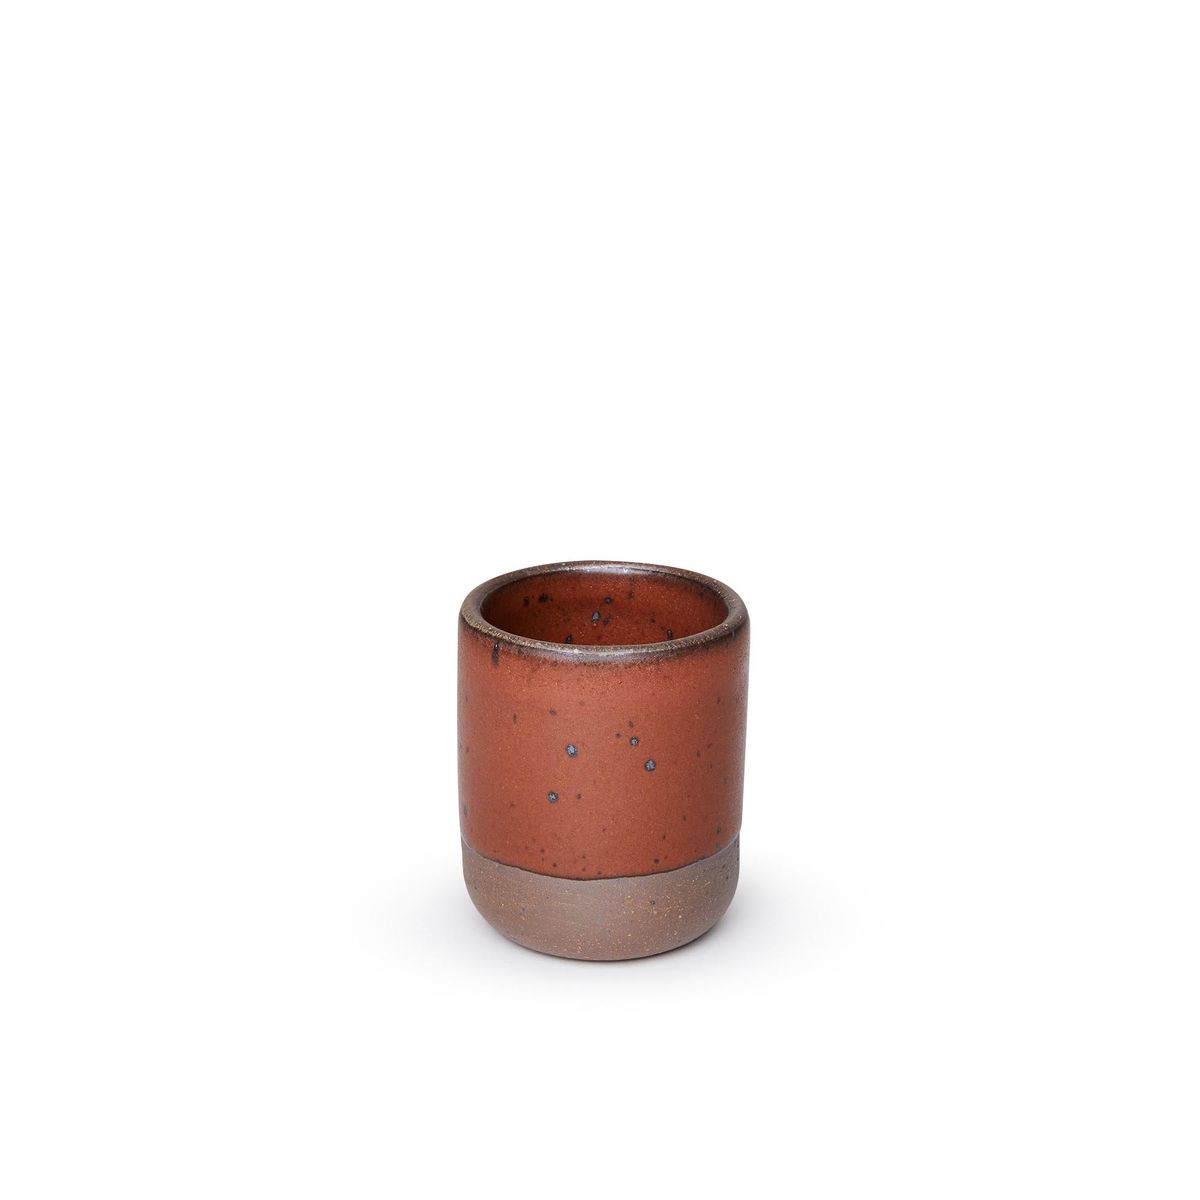 A small, short ceramic mug cup in a cool burnt terracotta color featuring iron speckles and unglazed rim and bottom base.